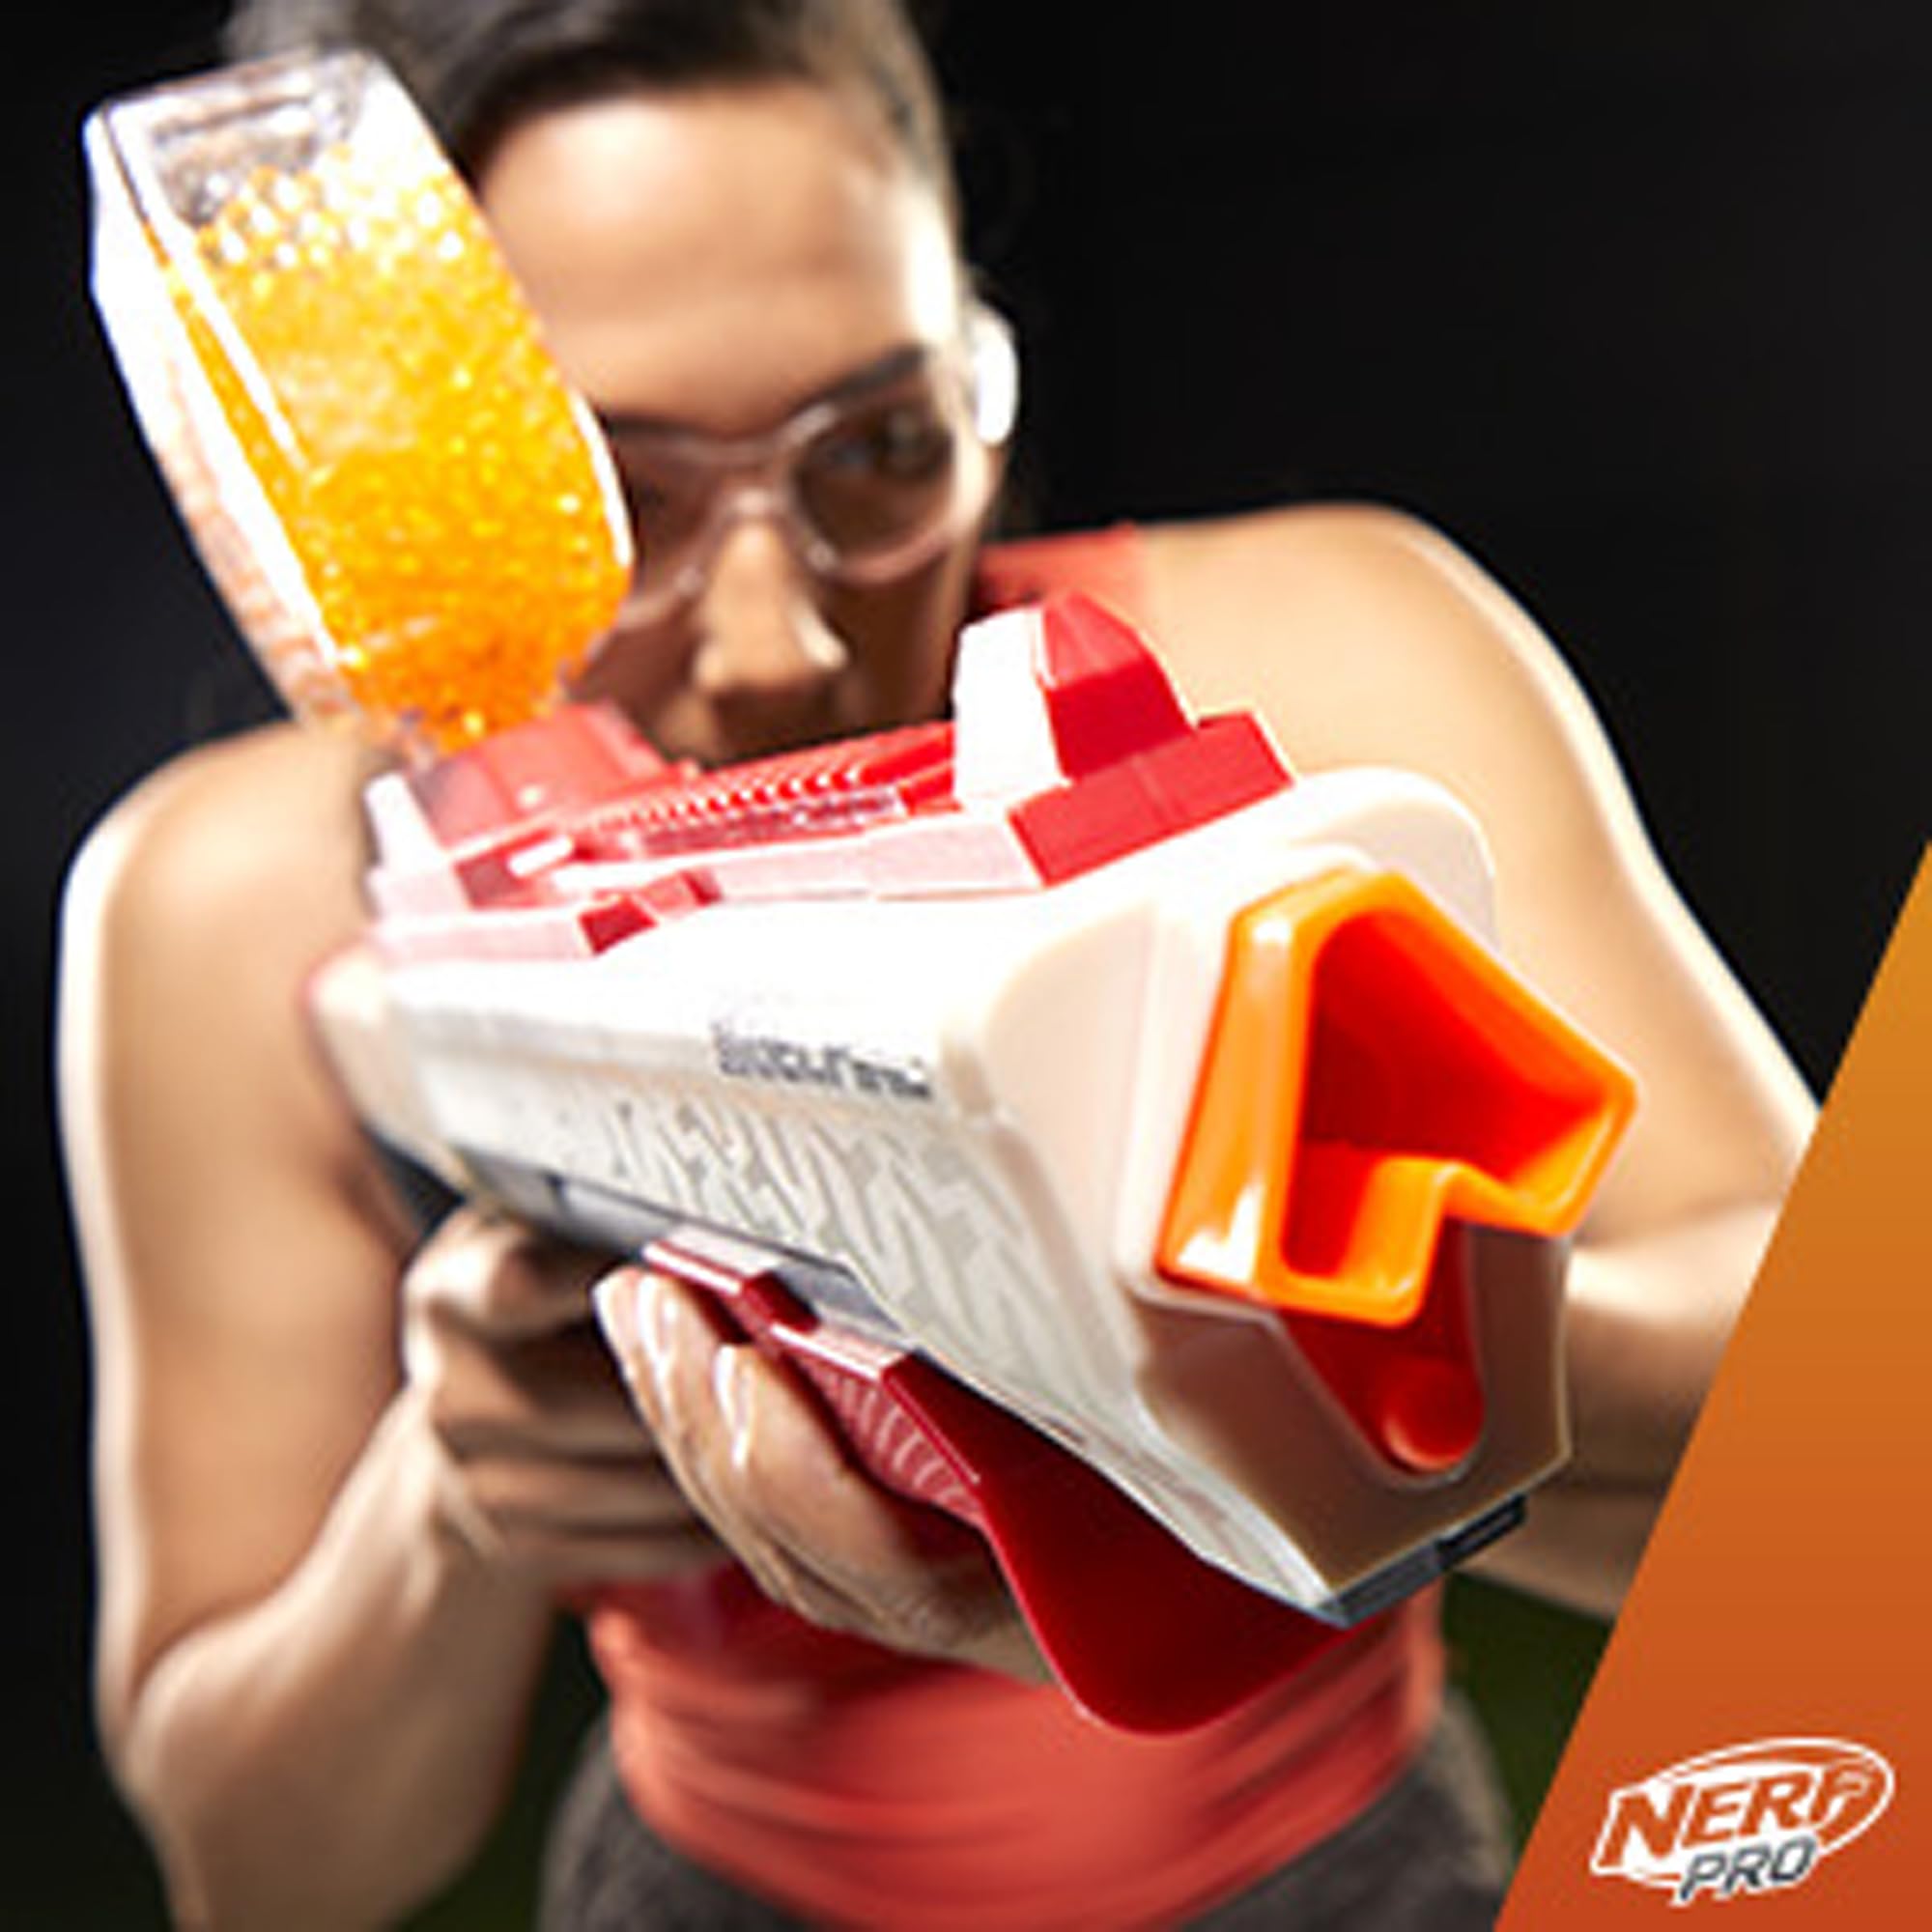 Nerf Pro Gelfire Raid Blaster, Fire 5 Rounds at Once, 10,000 Gel Rounds, 800 Round Hopper, Eyewear, Toys for Teens Ages 14 & Up